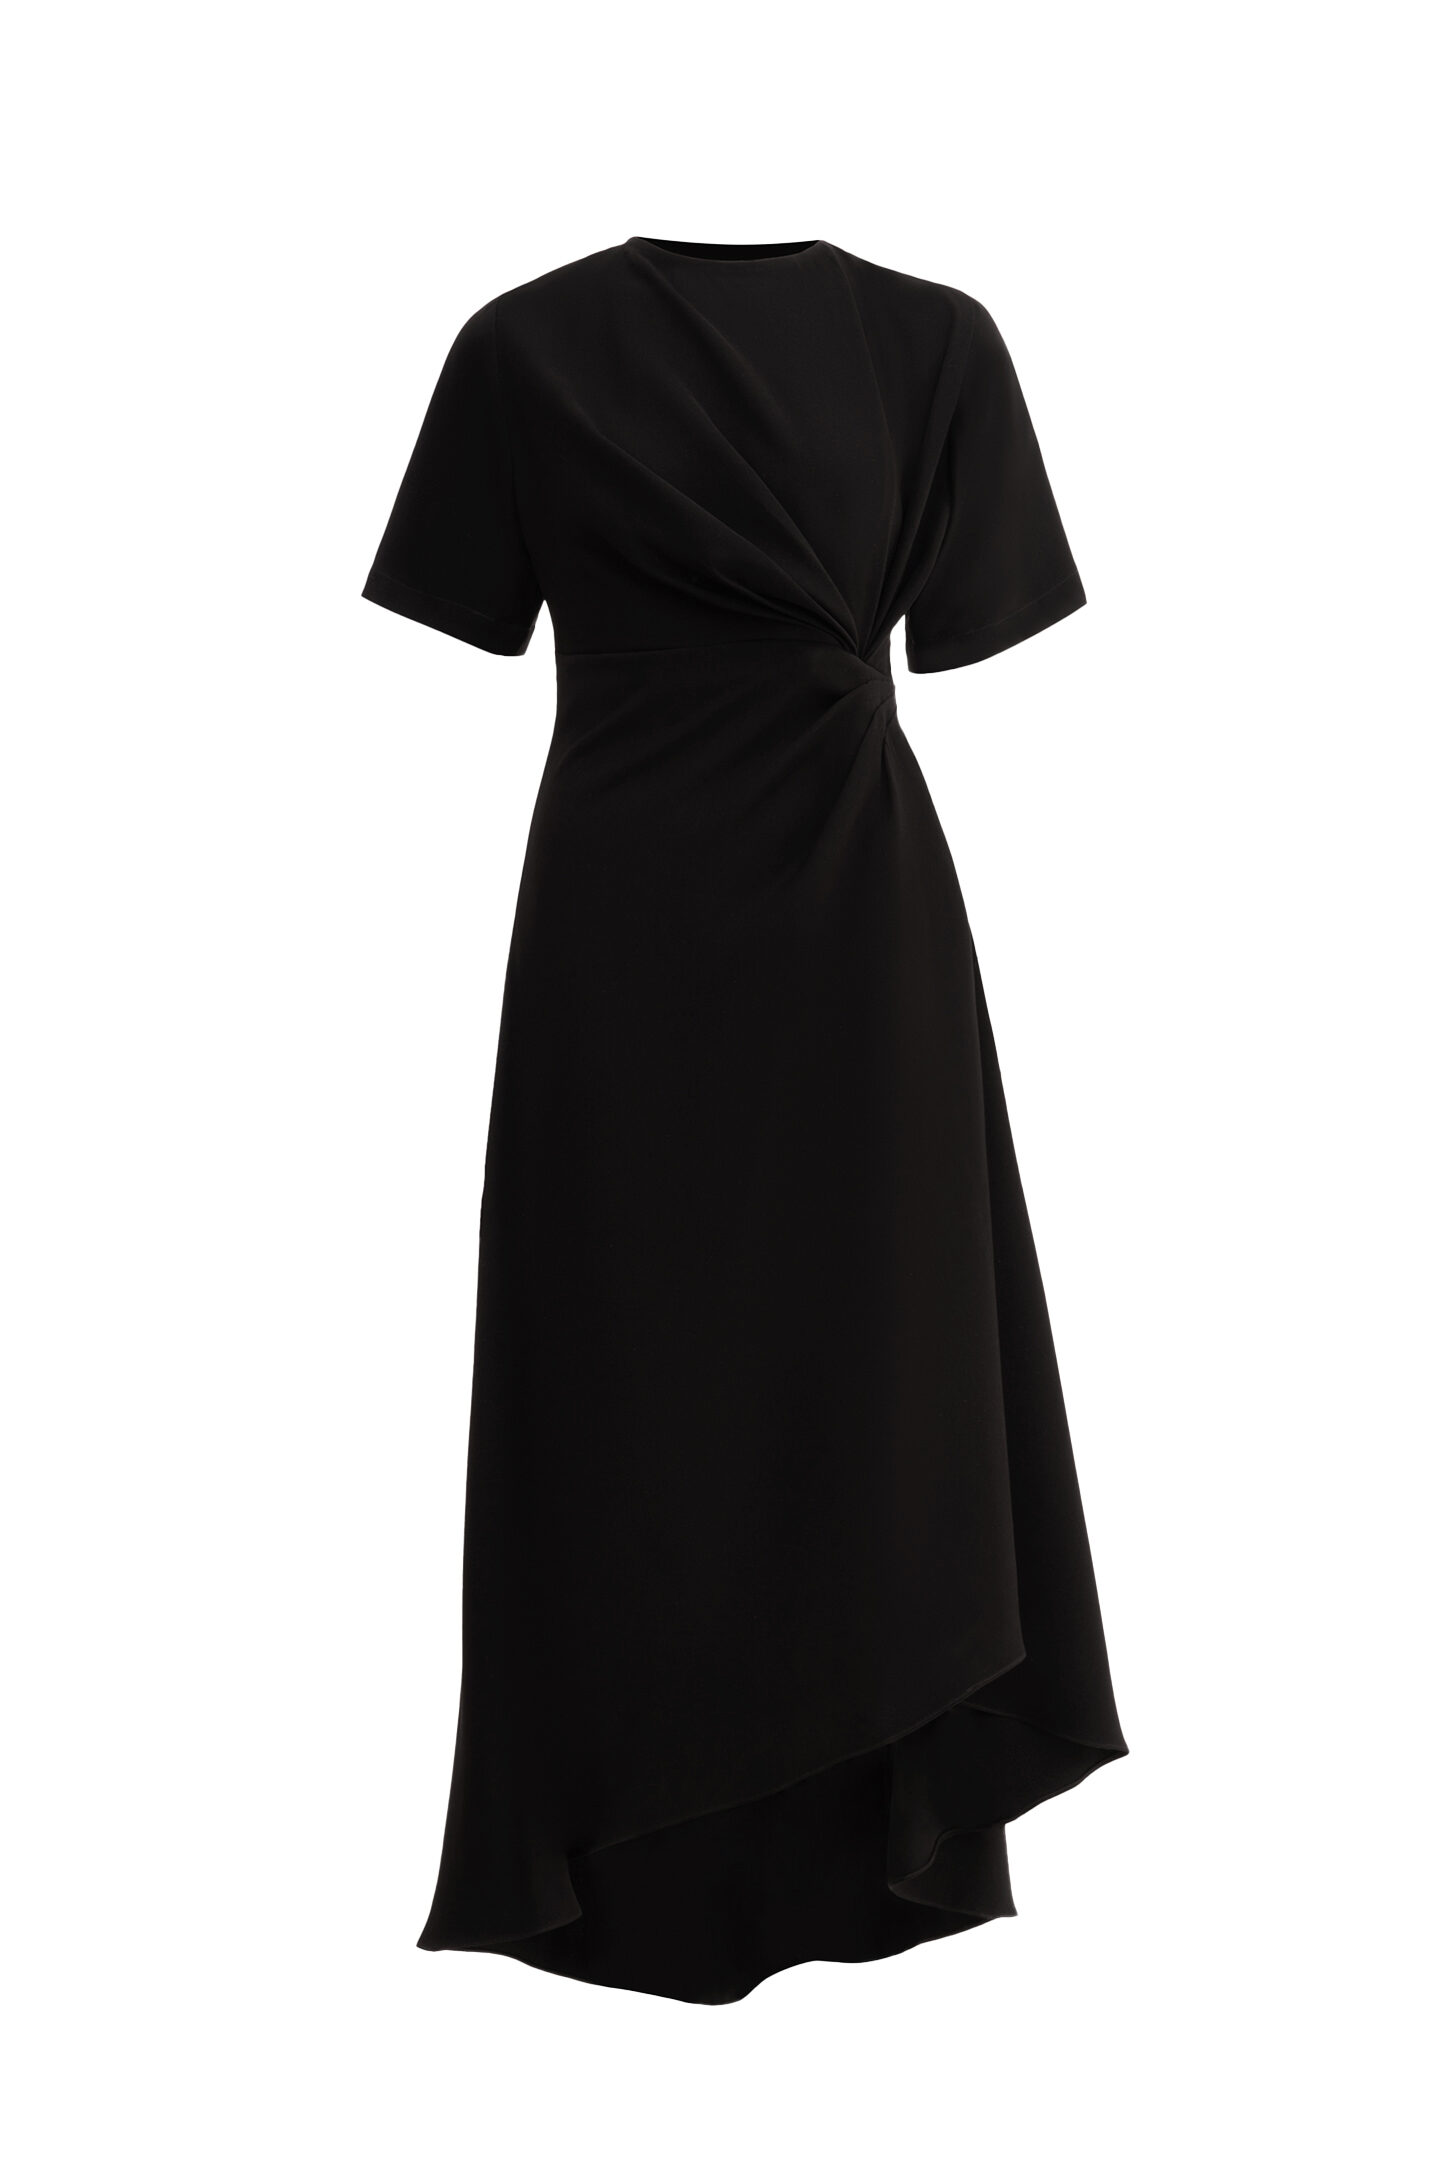 The Astrid Dress in Black - Atelier Patty Ang